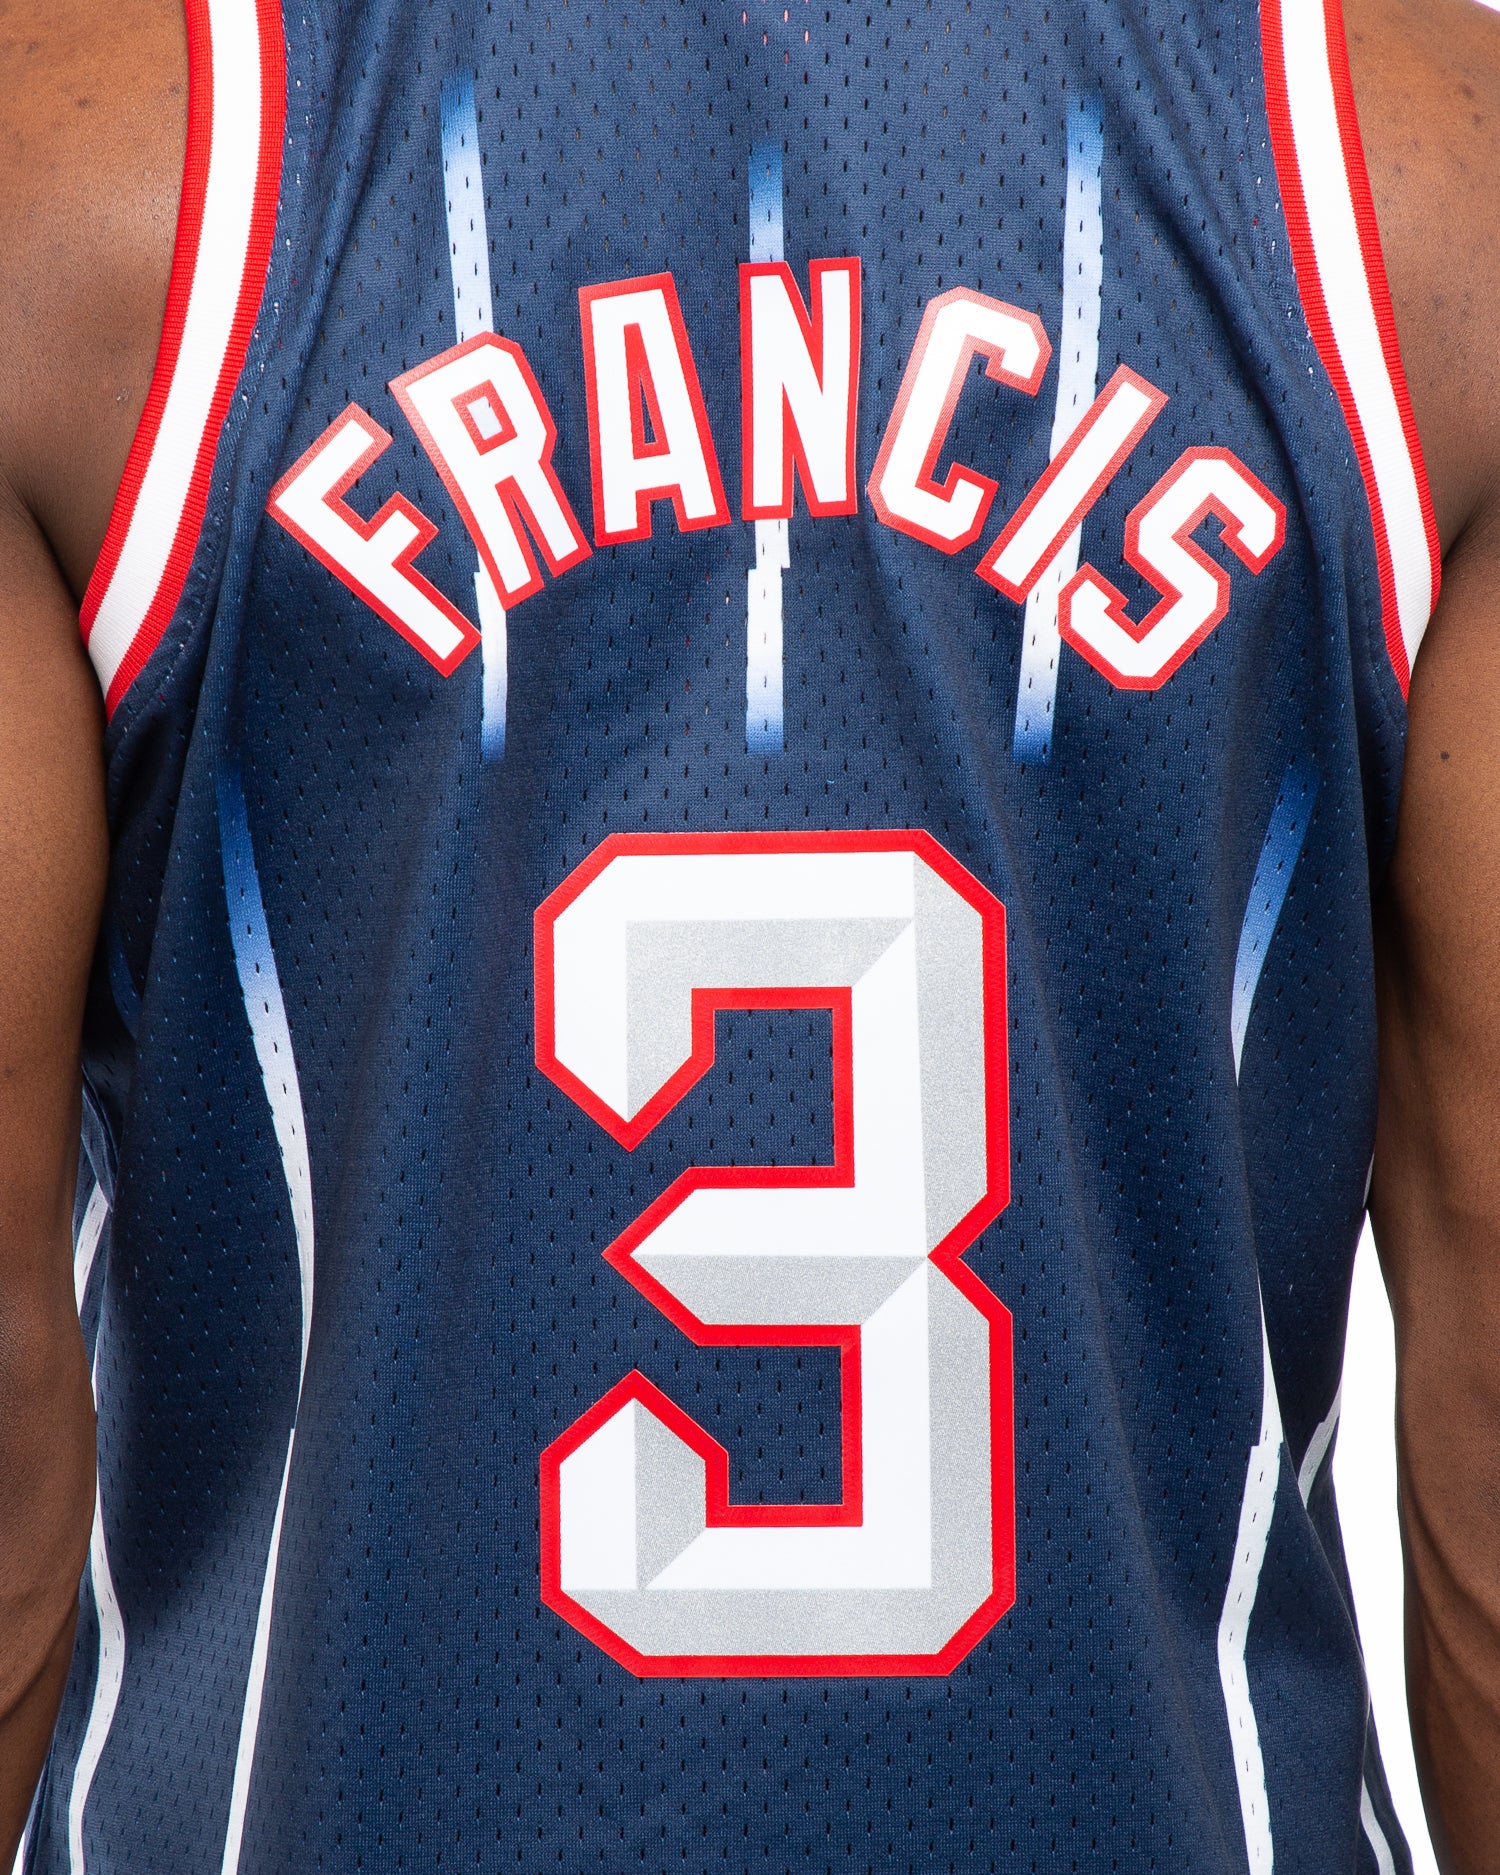 steve francis jersey mitchell and ness